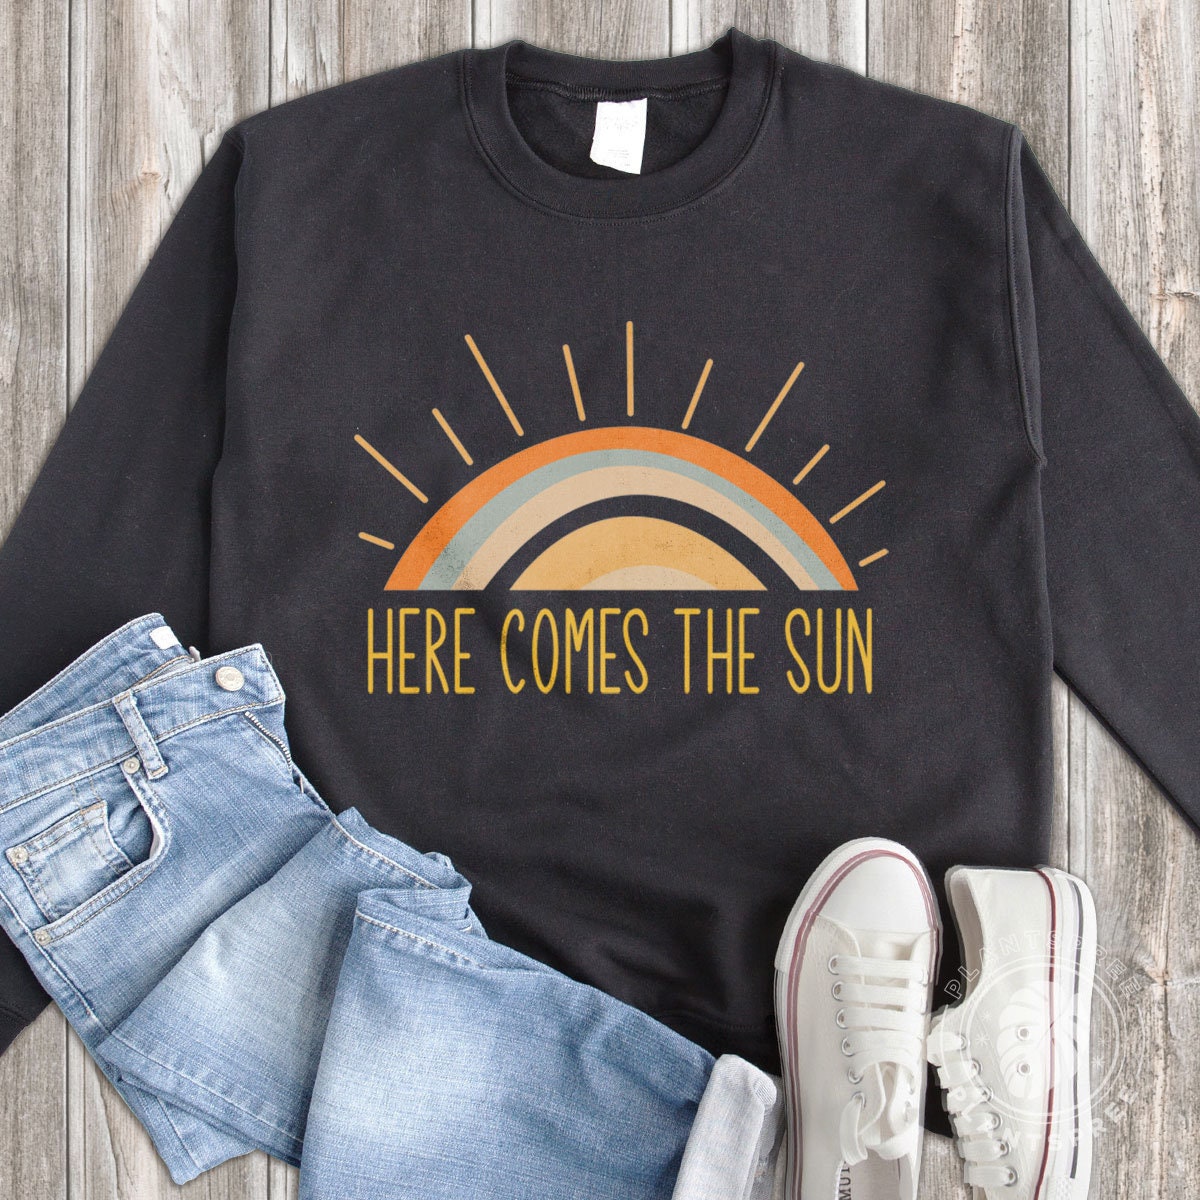 Here Comes The Sun Sweater Garden Sweatshirt Clothing Gift | Etsy